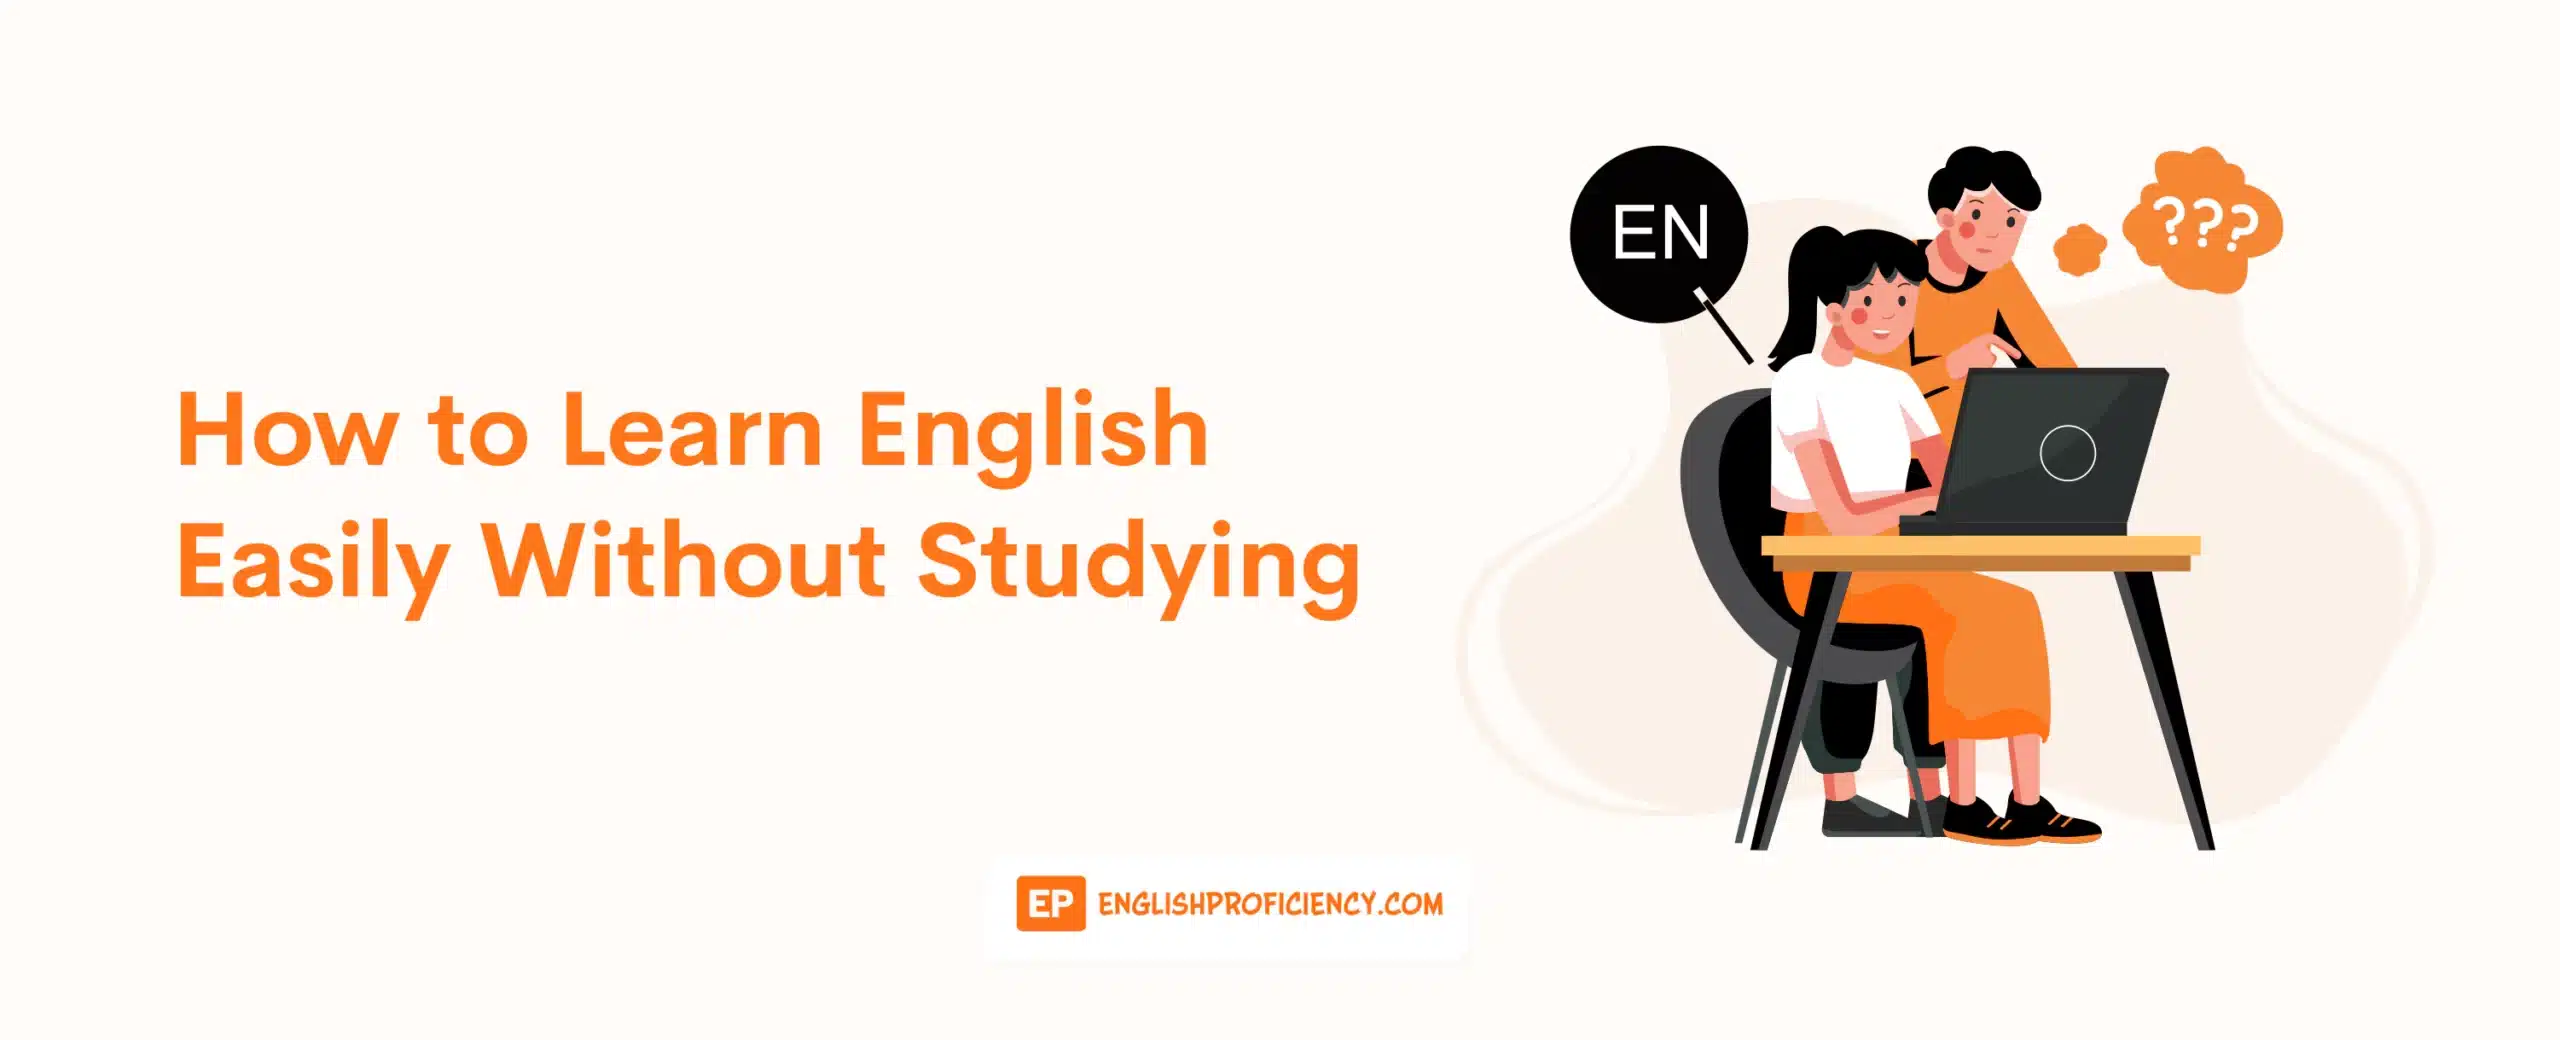 How to Learn English Easily Without Studying